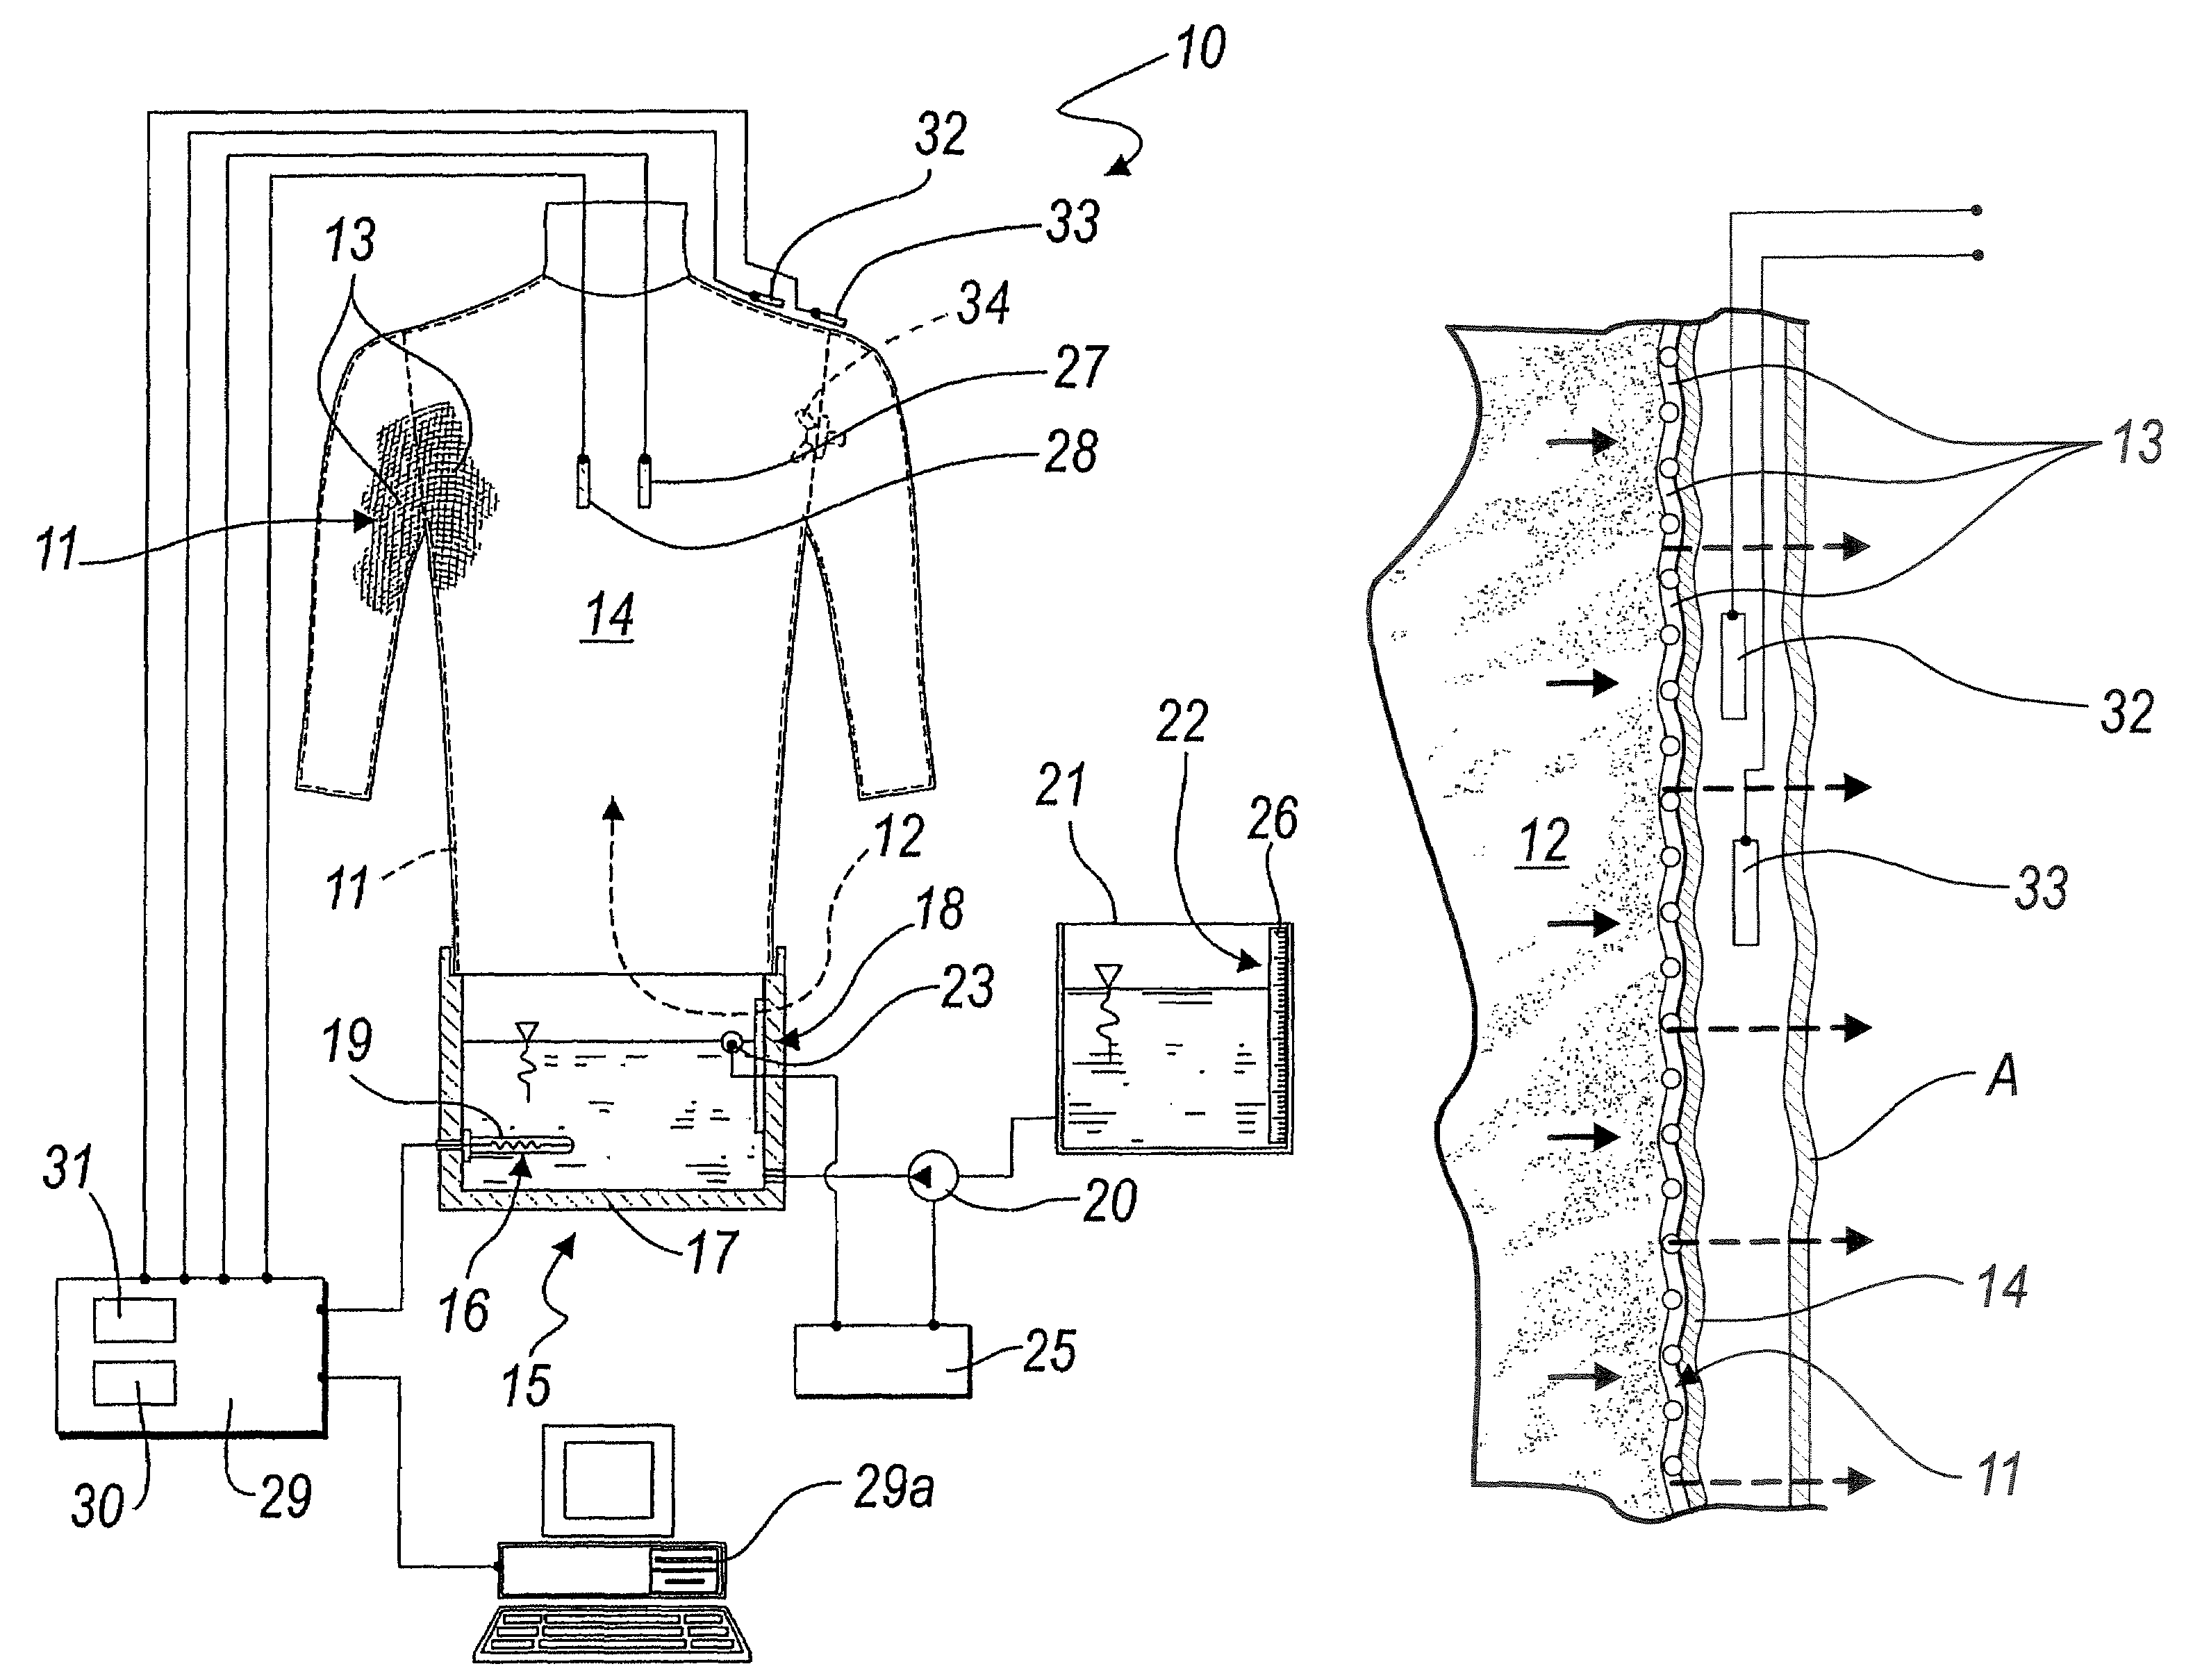 Apparatus for simulating the perspiration of the human body and for assessing the vapor permeability and comfort of an item of clothing